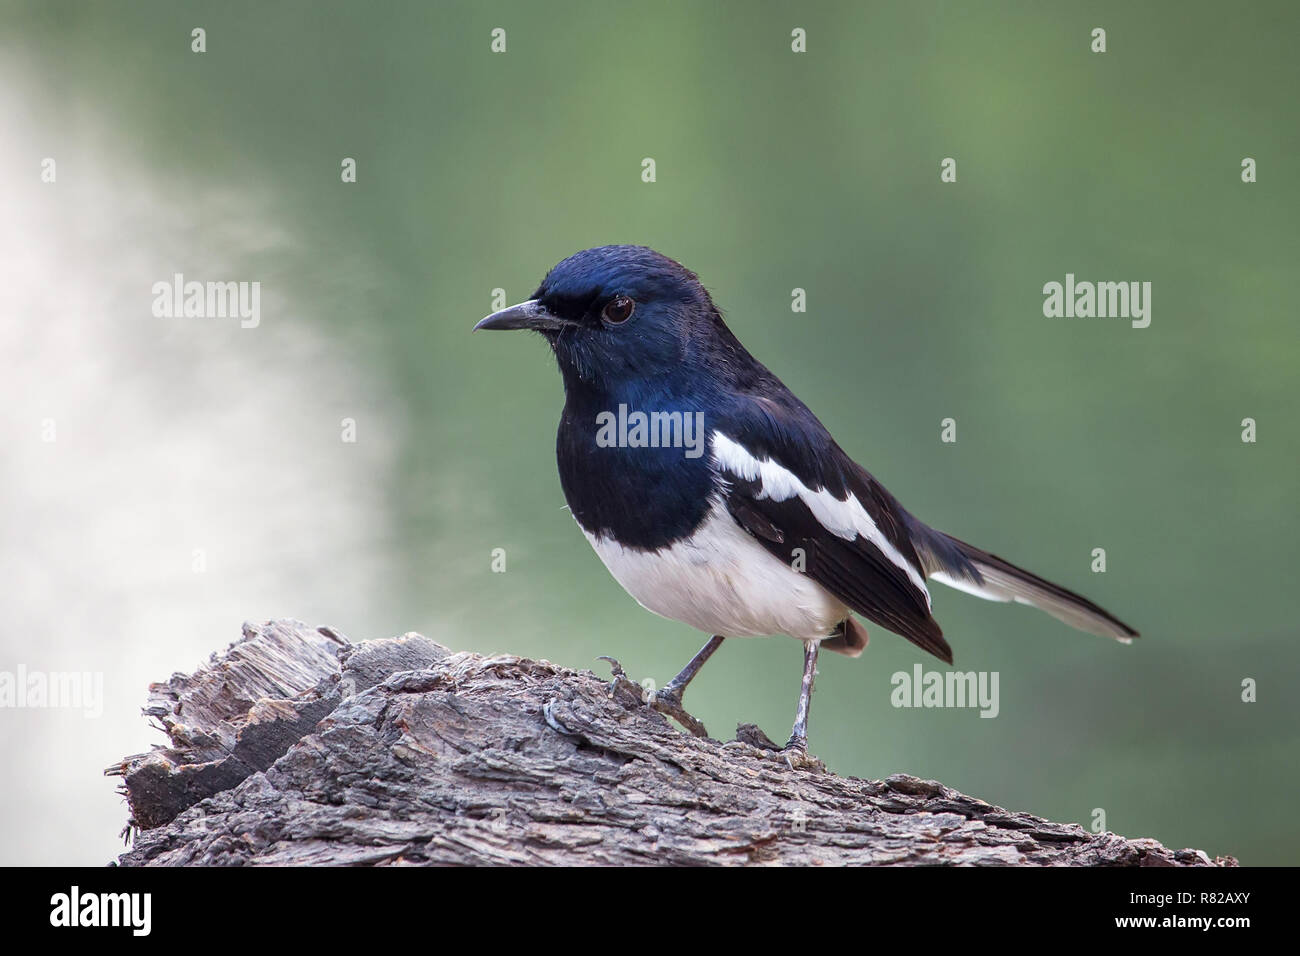 Oriental magpie-robin (Copsychus saularis) sitting on a tree in Keoladeo Ghana National Park, Bharatpur, India. The park was declared a protected sanc Stock Photo